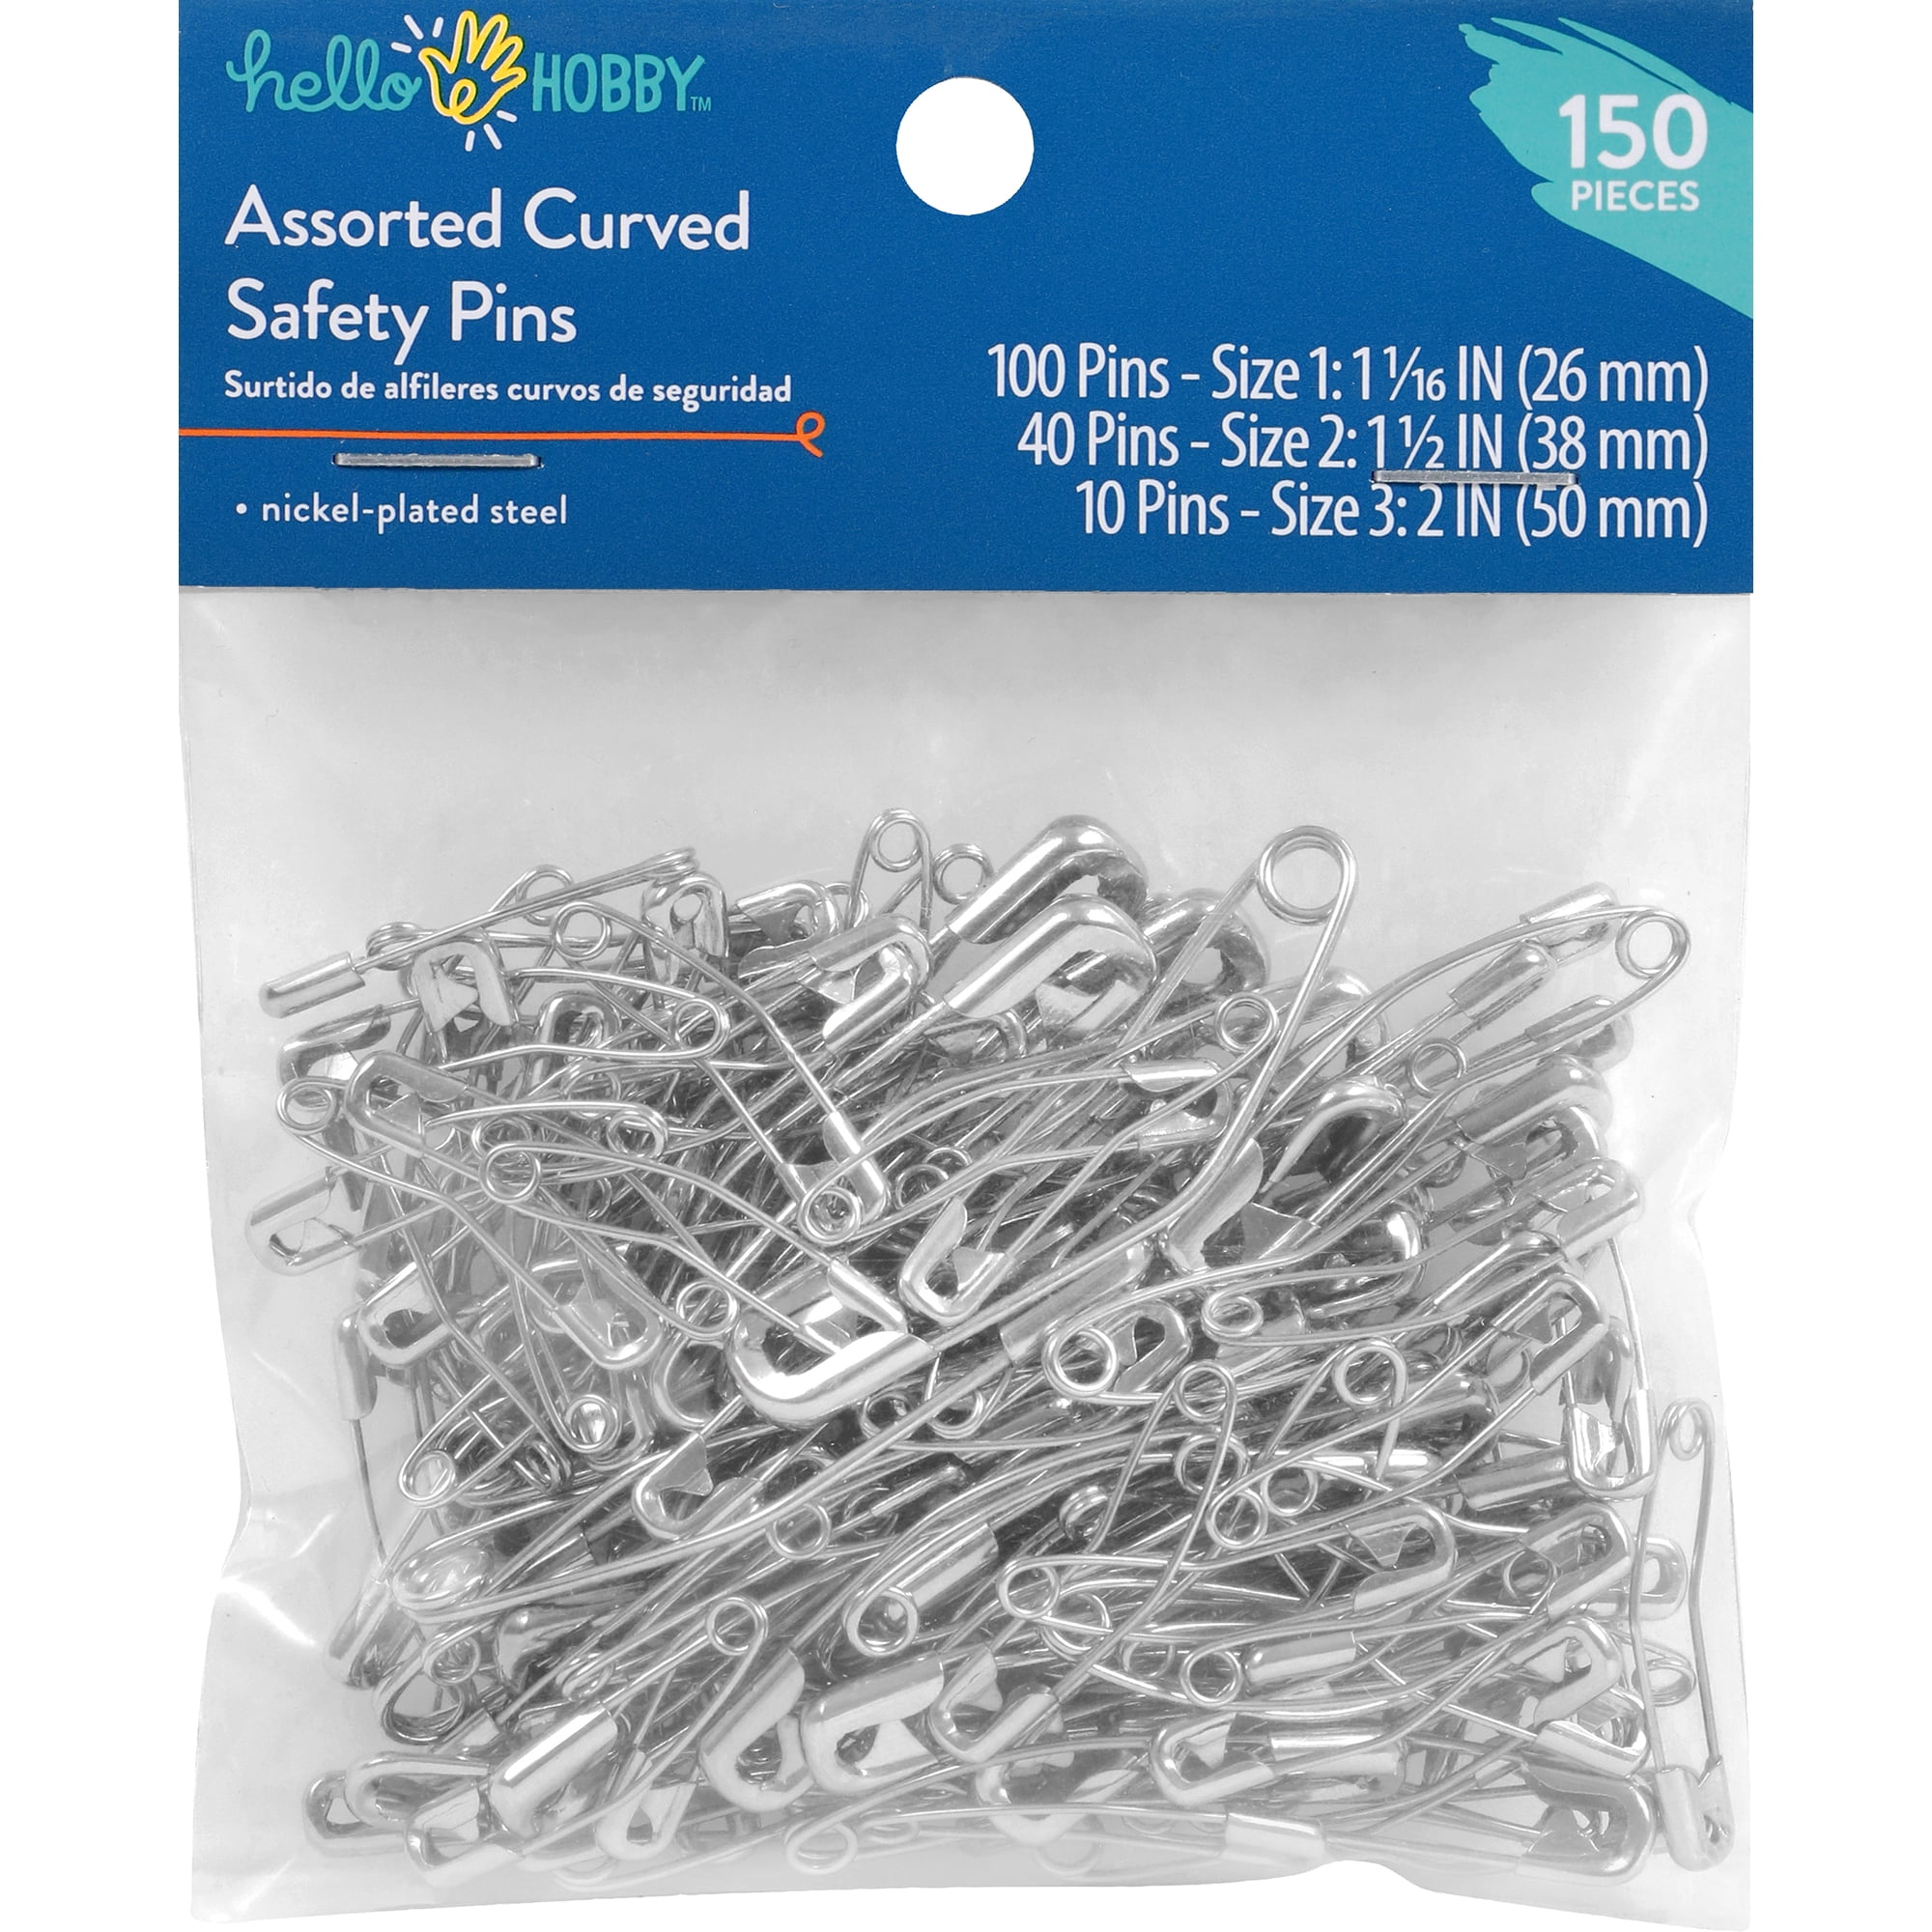 5 PCS of 5 Inch Heavy Duty Jumbo Stainless Steel Safety Pins Silver Color Safety  Pins for Laundry, Blanket, Key Rings, Outdoor